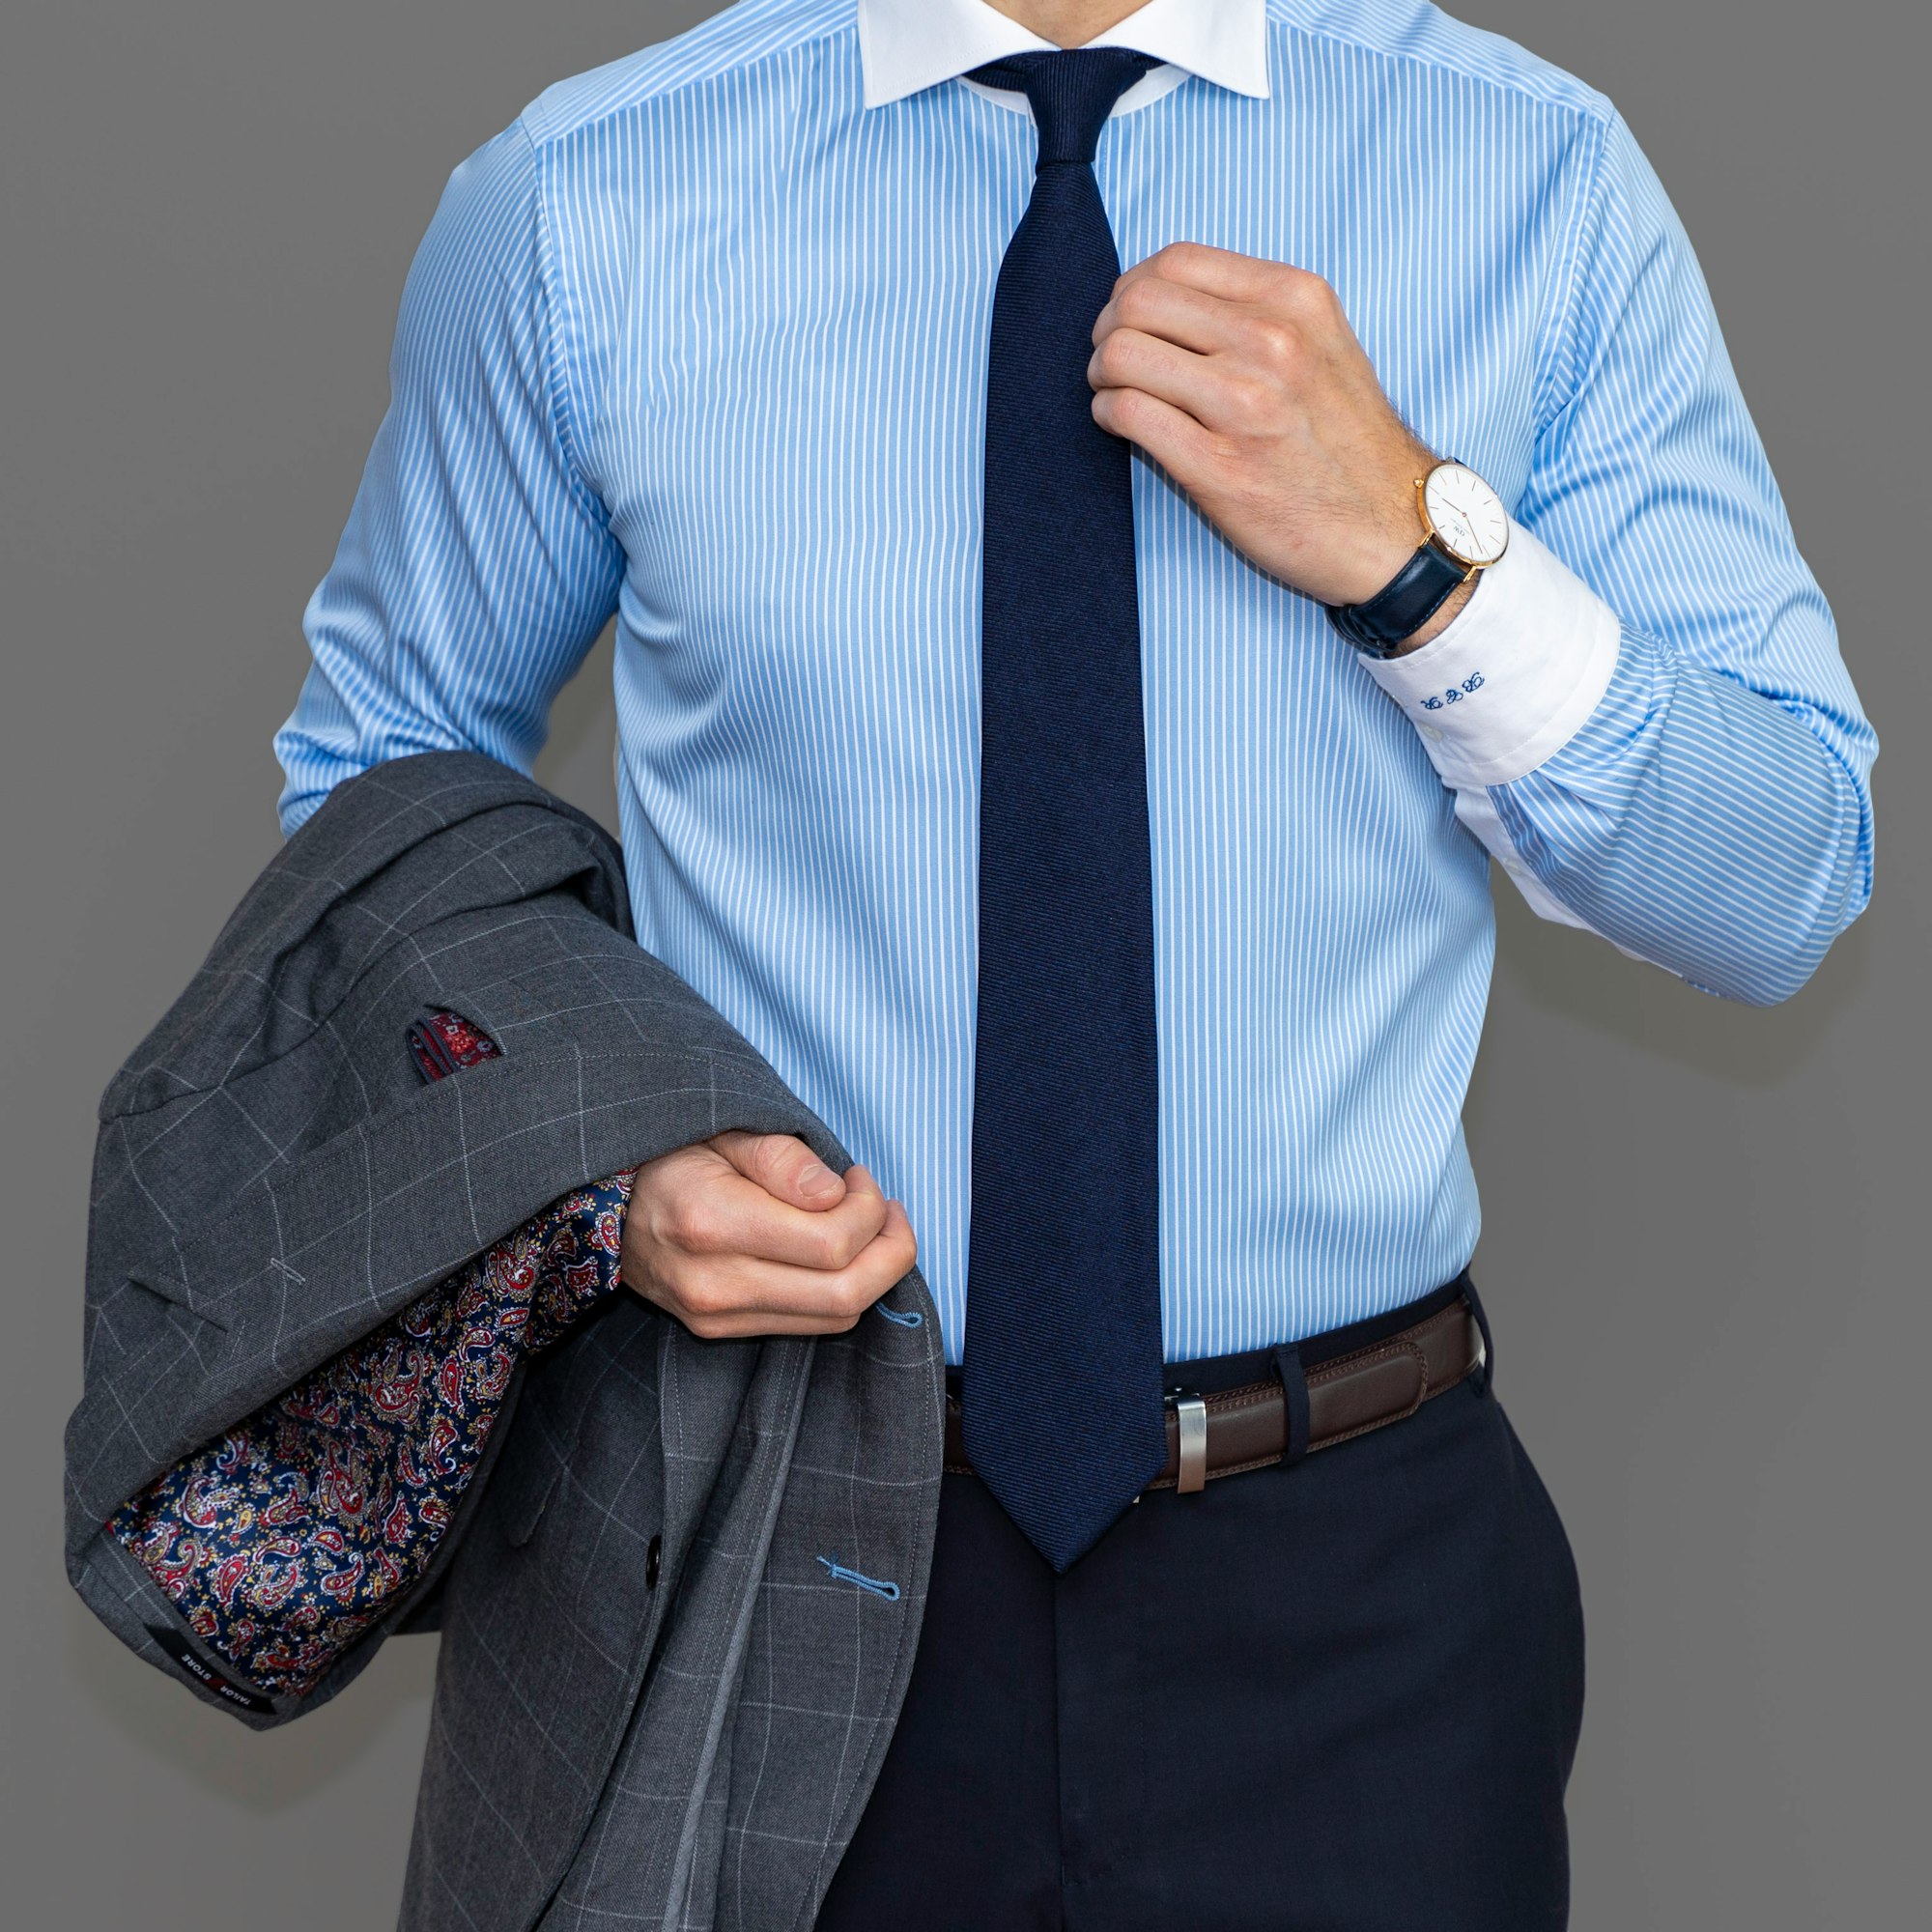 Dapper Professional wearing a custom shirt featuring a blue pinstripe with contrasting cuffs and wide spread collar. He's wearing a solid blue tie and holding a custom blazer. 